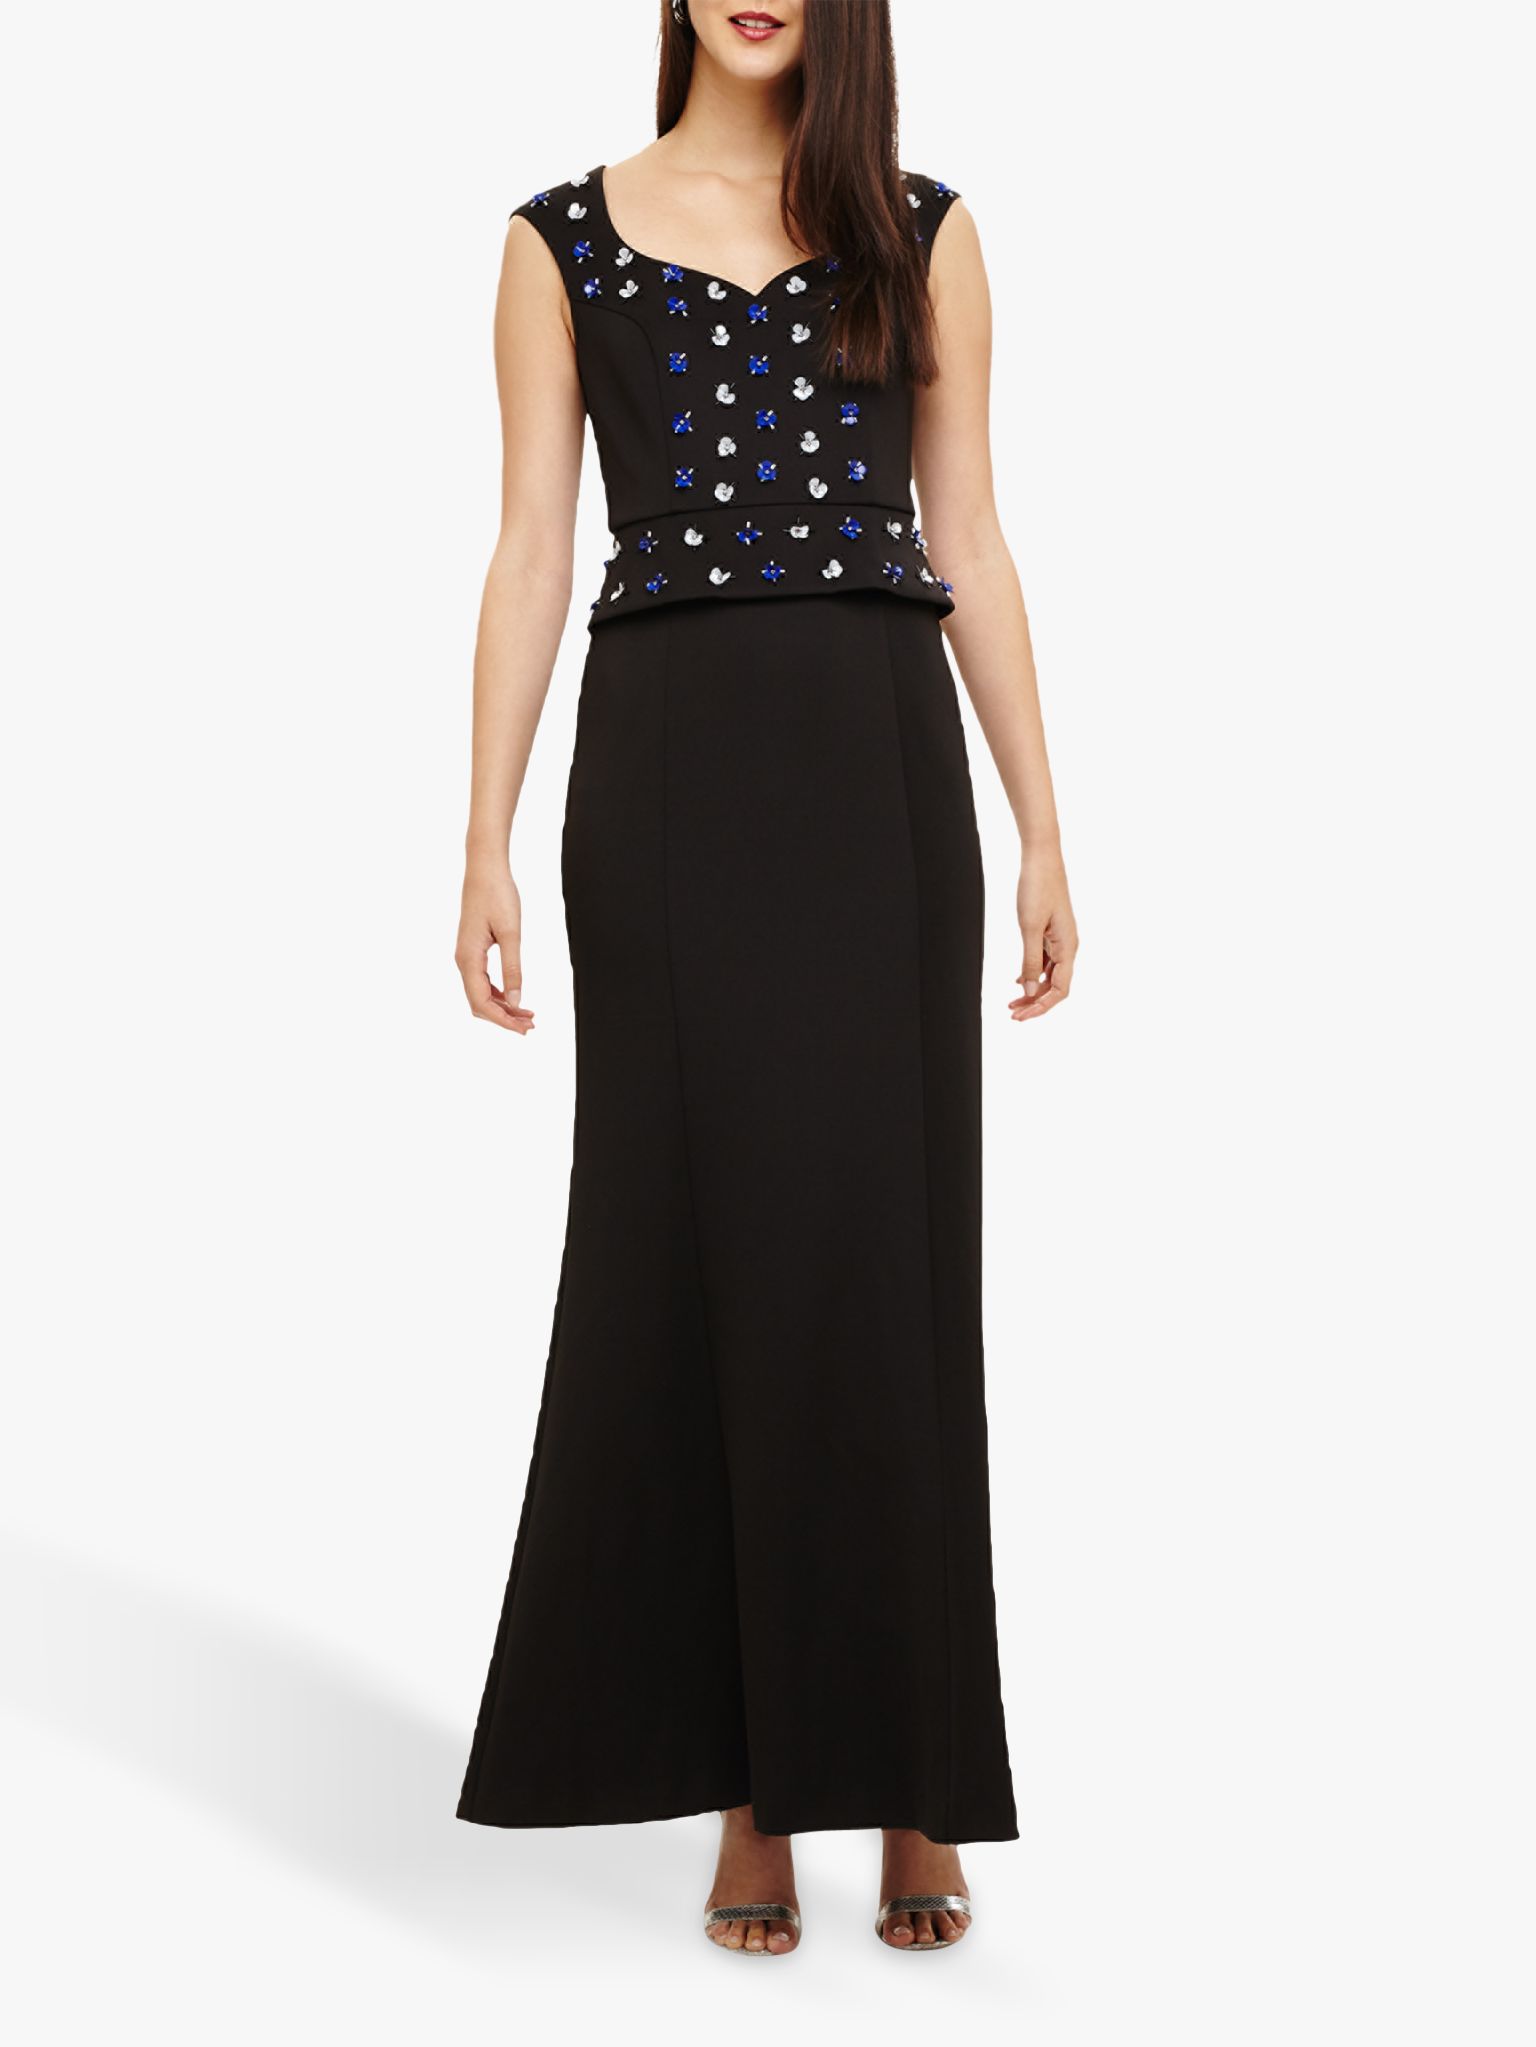 Phase Eight Collection 8 Louise Embellished Dress, Black